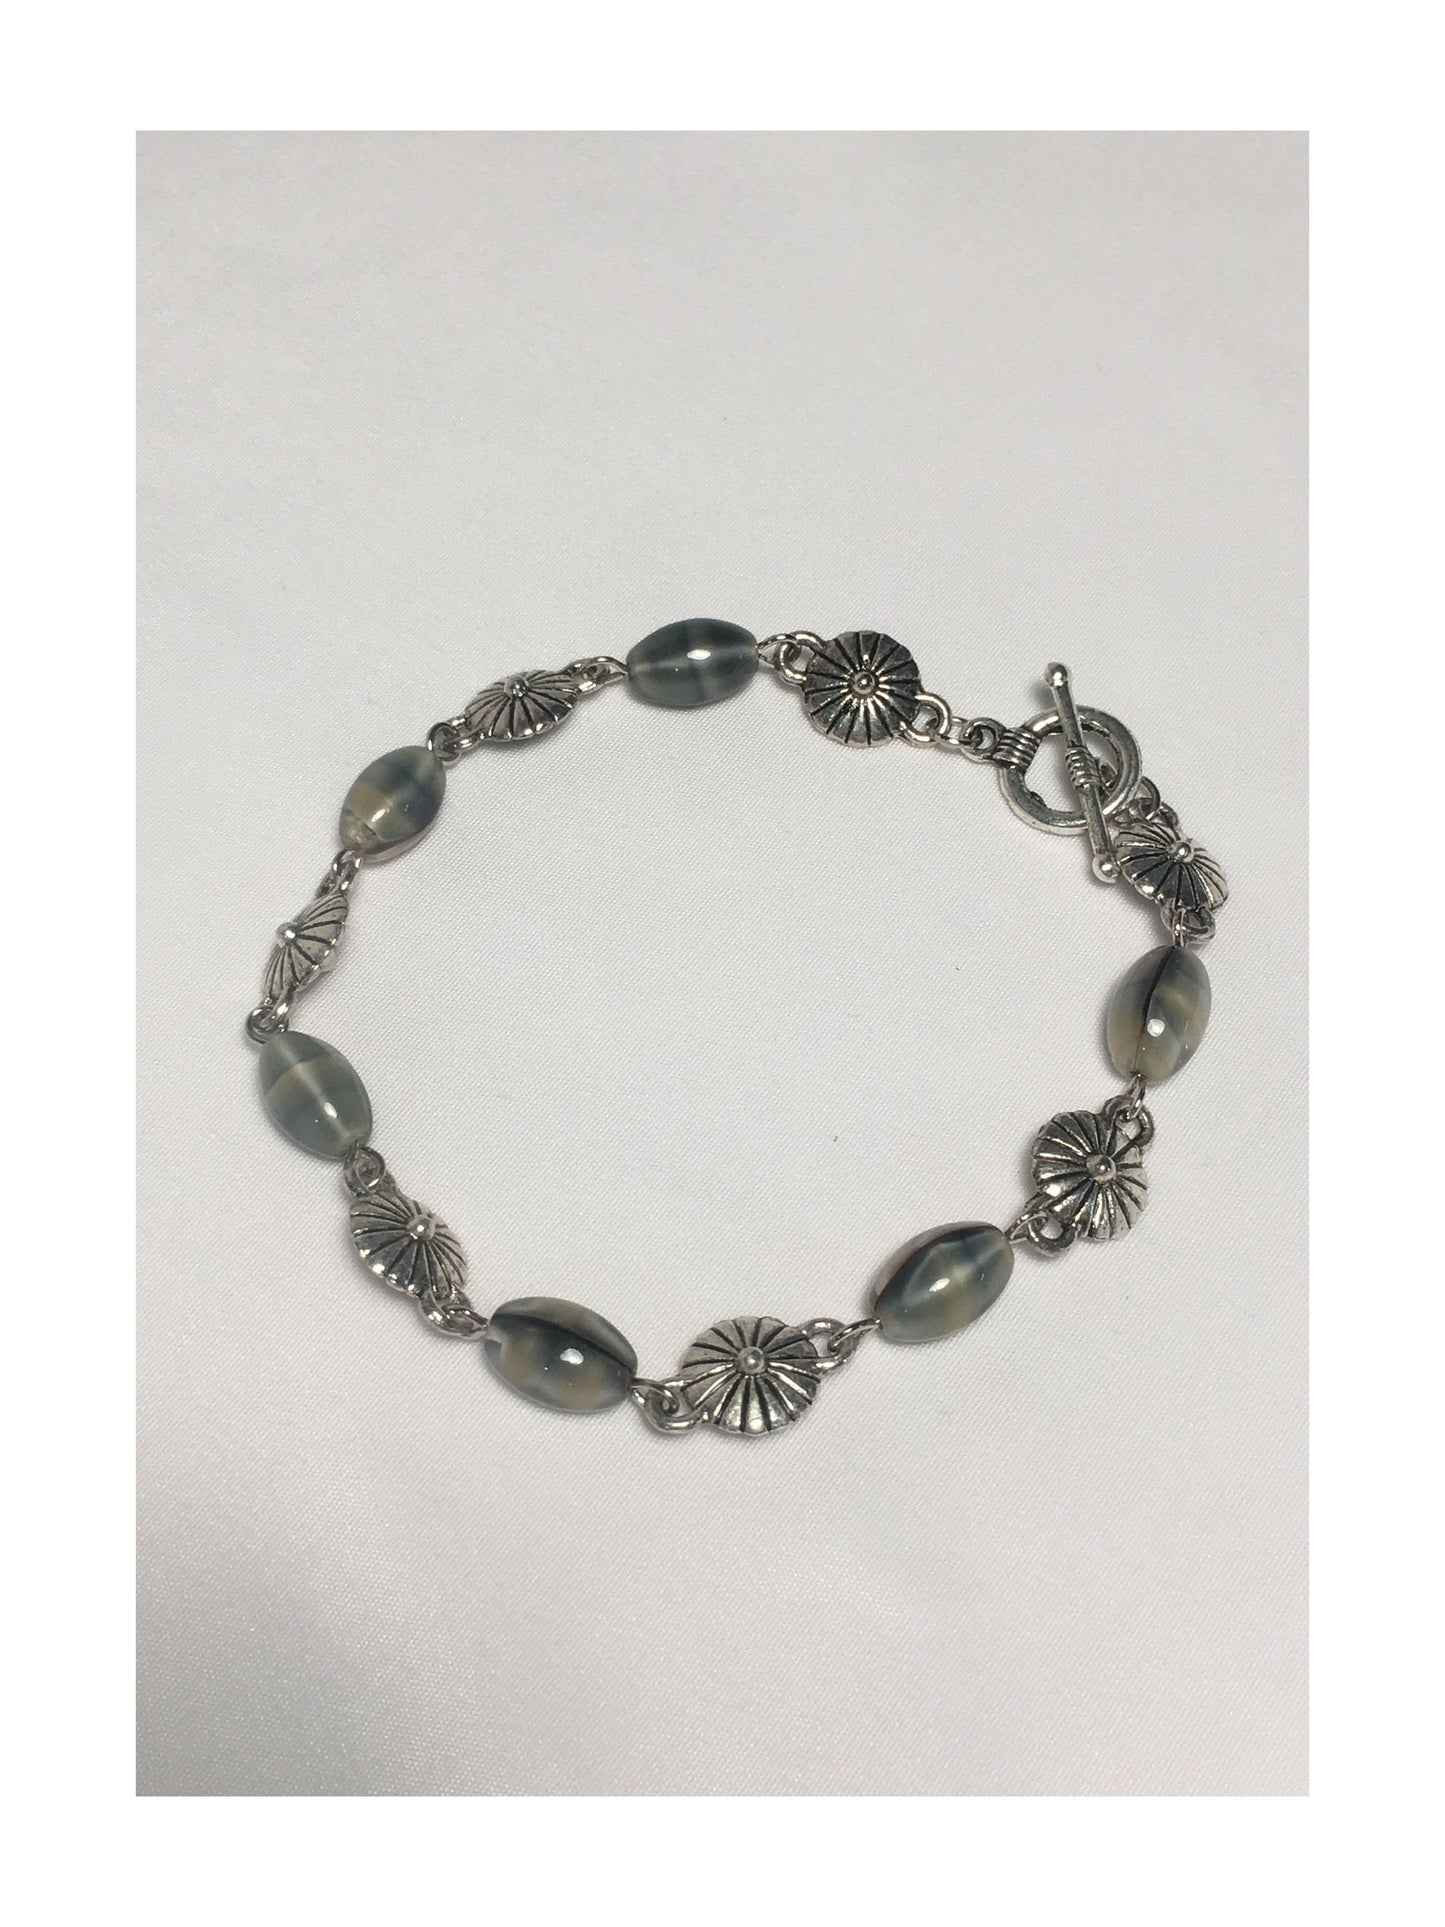 Faux Mother of Pearl Glass Bead Bracelet with Toggle Clasp